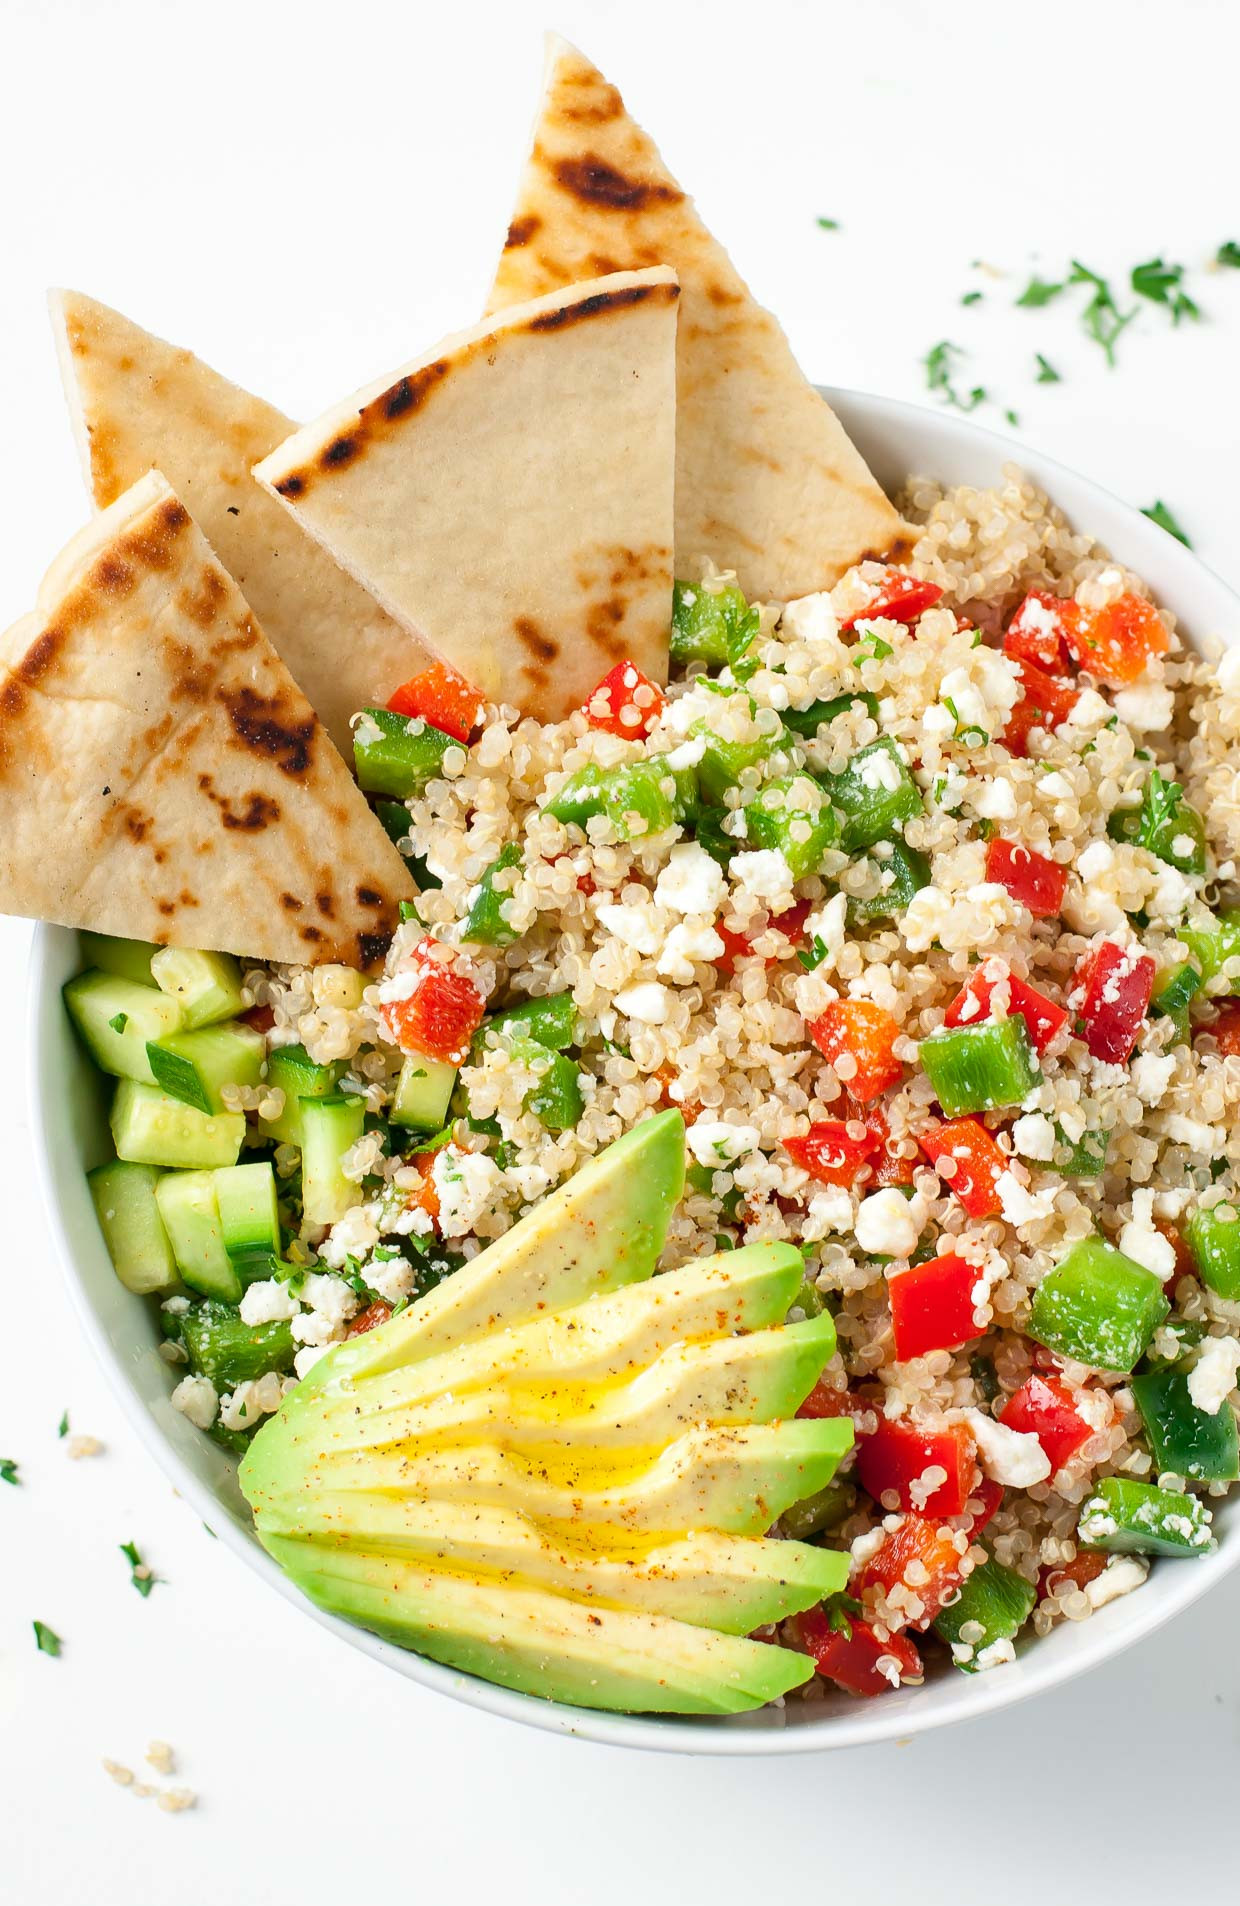 Healthy Quinoa Bowls 20 Of the Best Ideas for Greek Quinoa Bowls Healthy Ve Arian Grain Bowls Peas